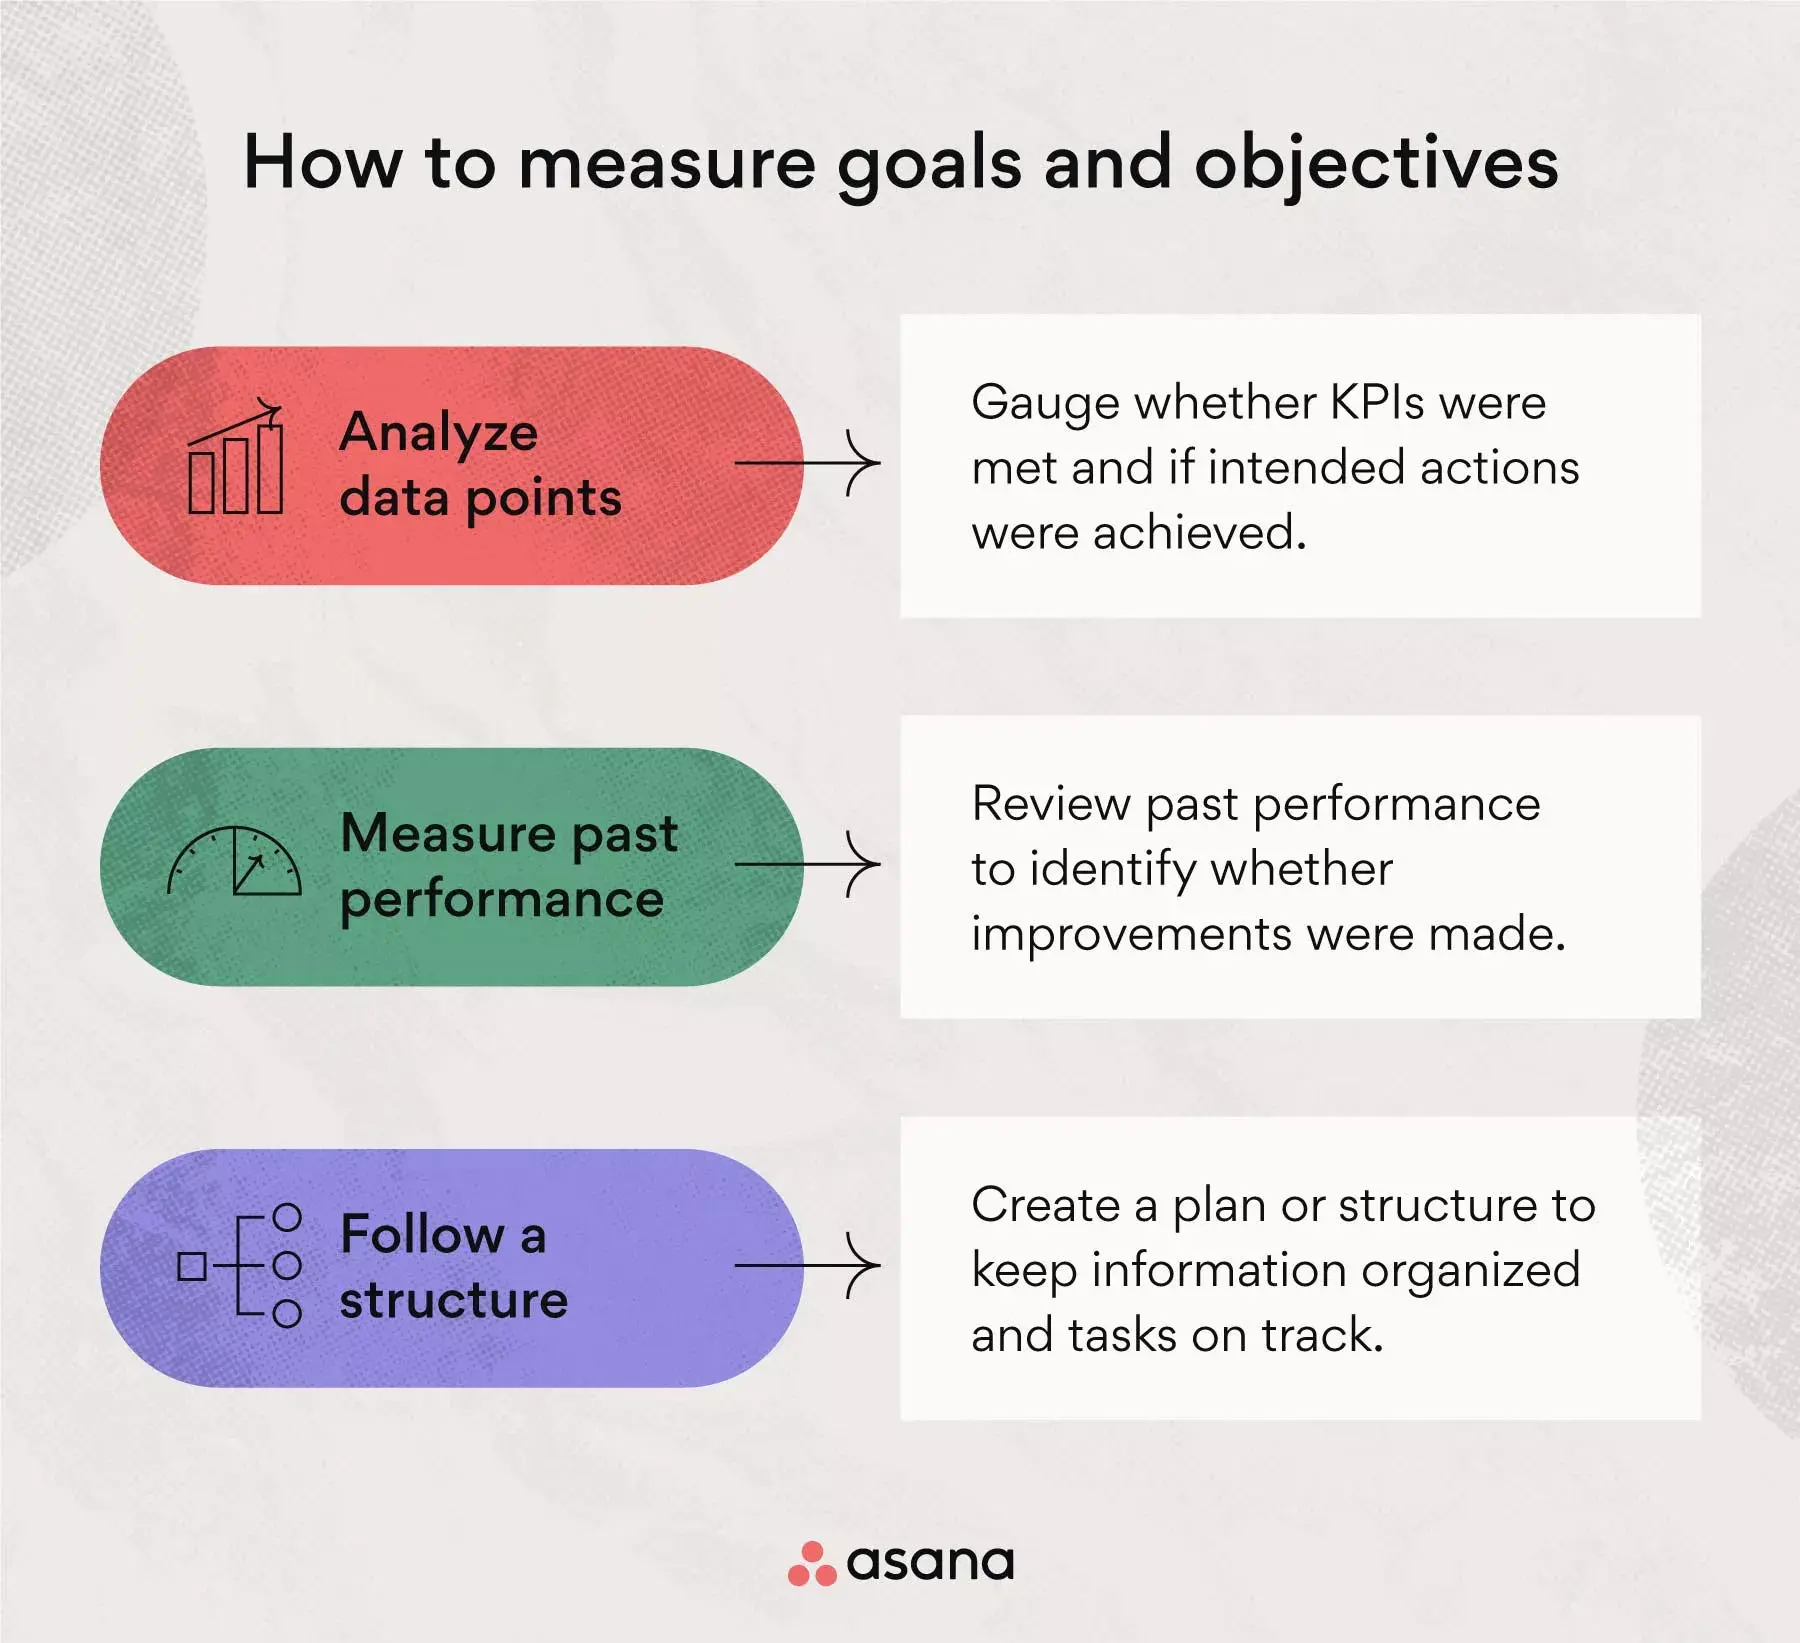 How to measure goals and objectives